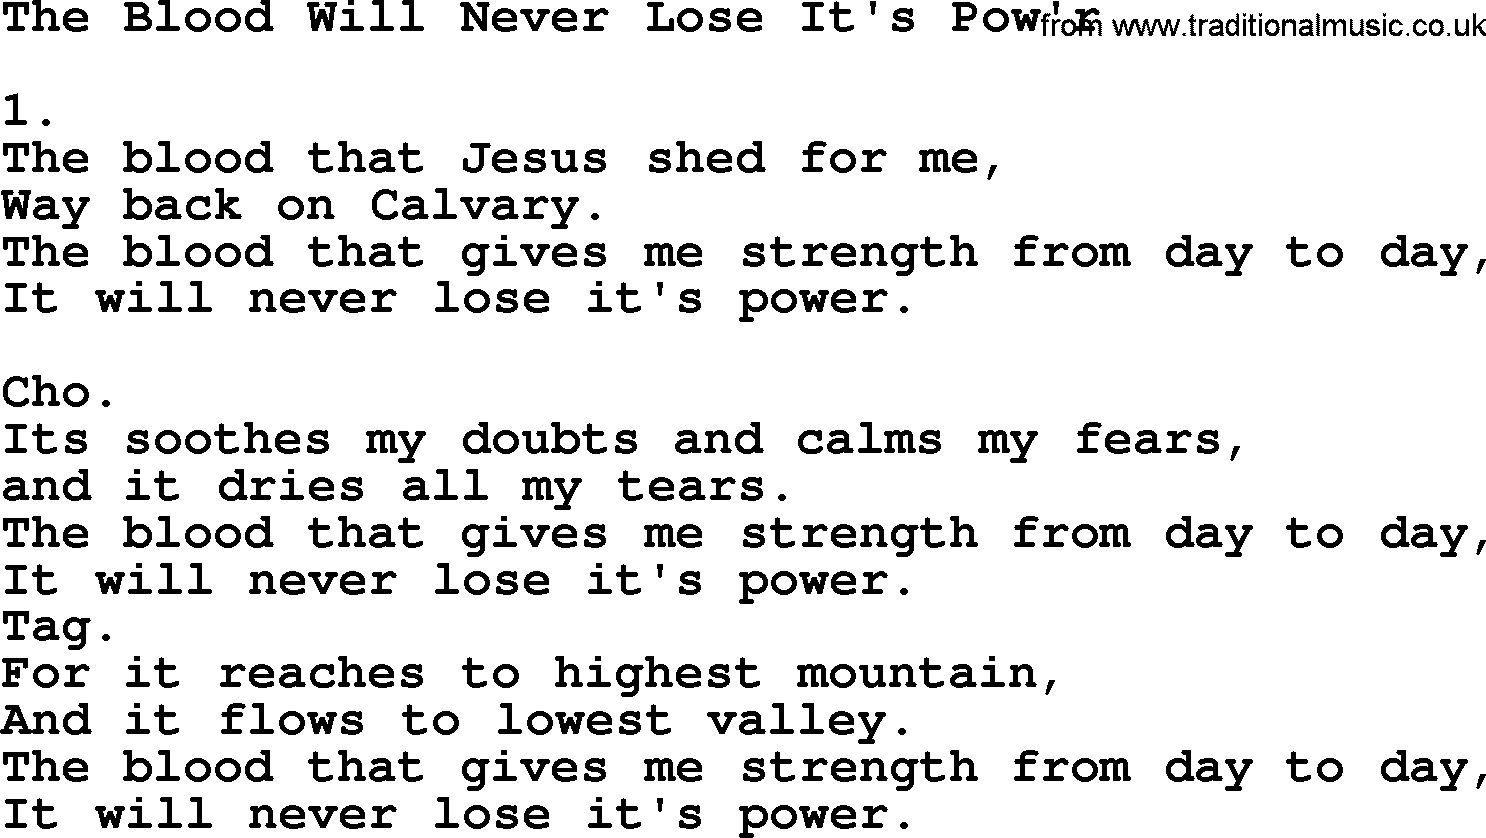 Apostolic & Pentecostal Hymns and Songs, Hymn: The Blood Will Never Lose It's Pow'r lyrics and PDF